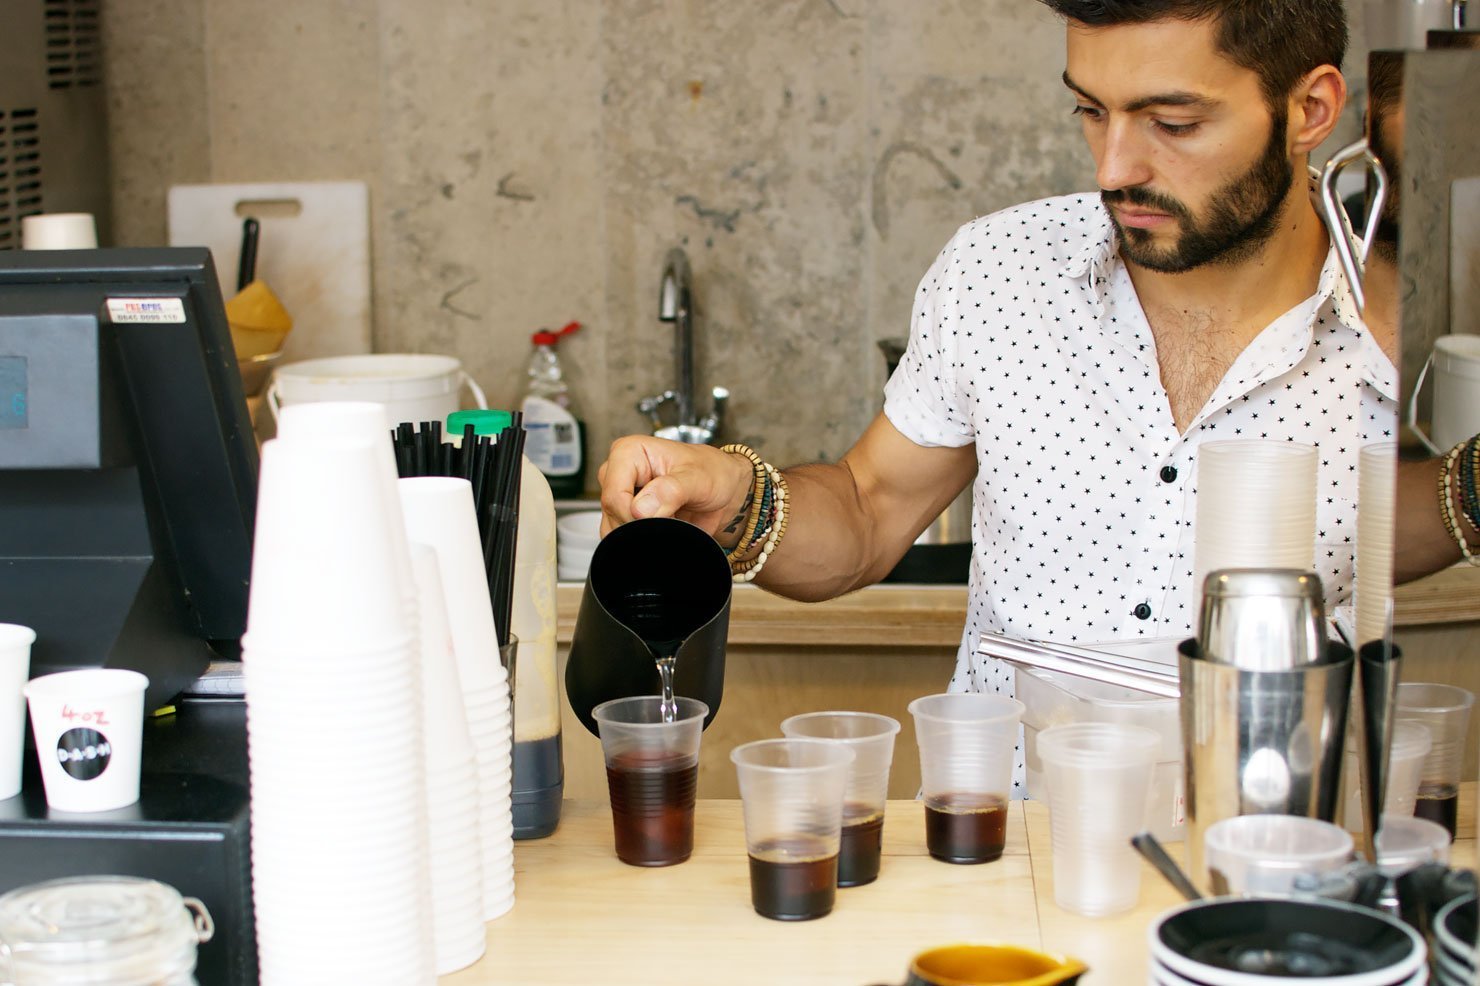 Cold Brew: Coffee tasting (or cupping) at Drink, Shop & Dash - a new specialty coffee bar in King's Cross in London